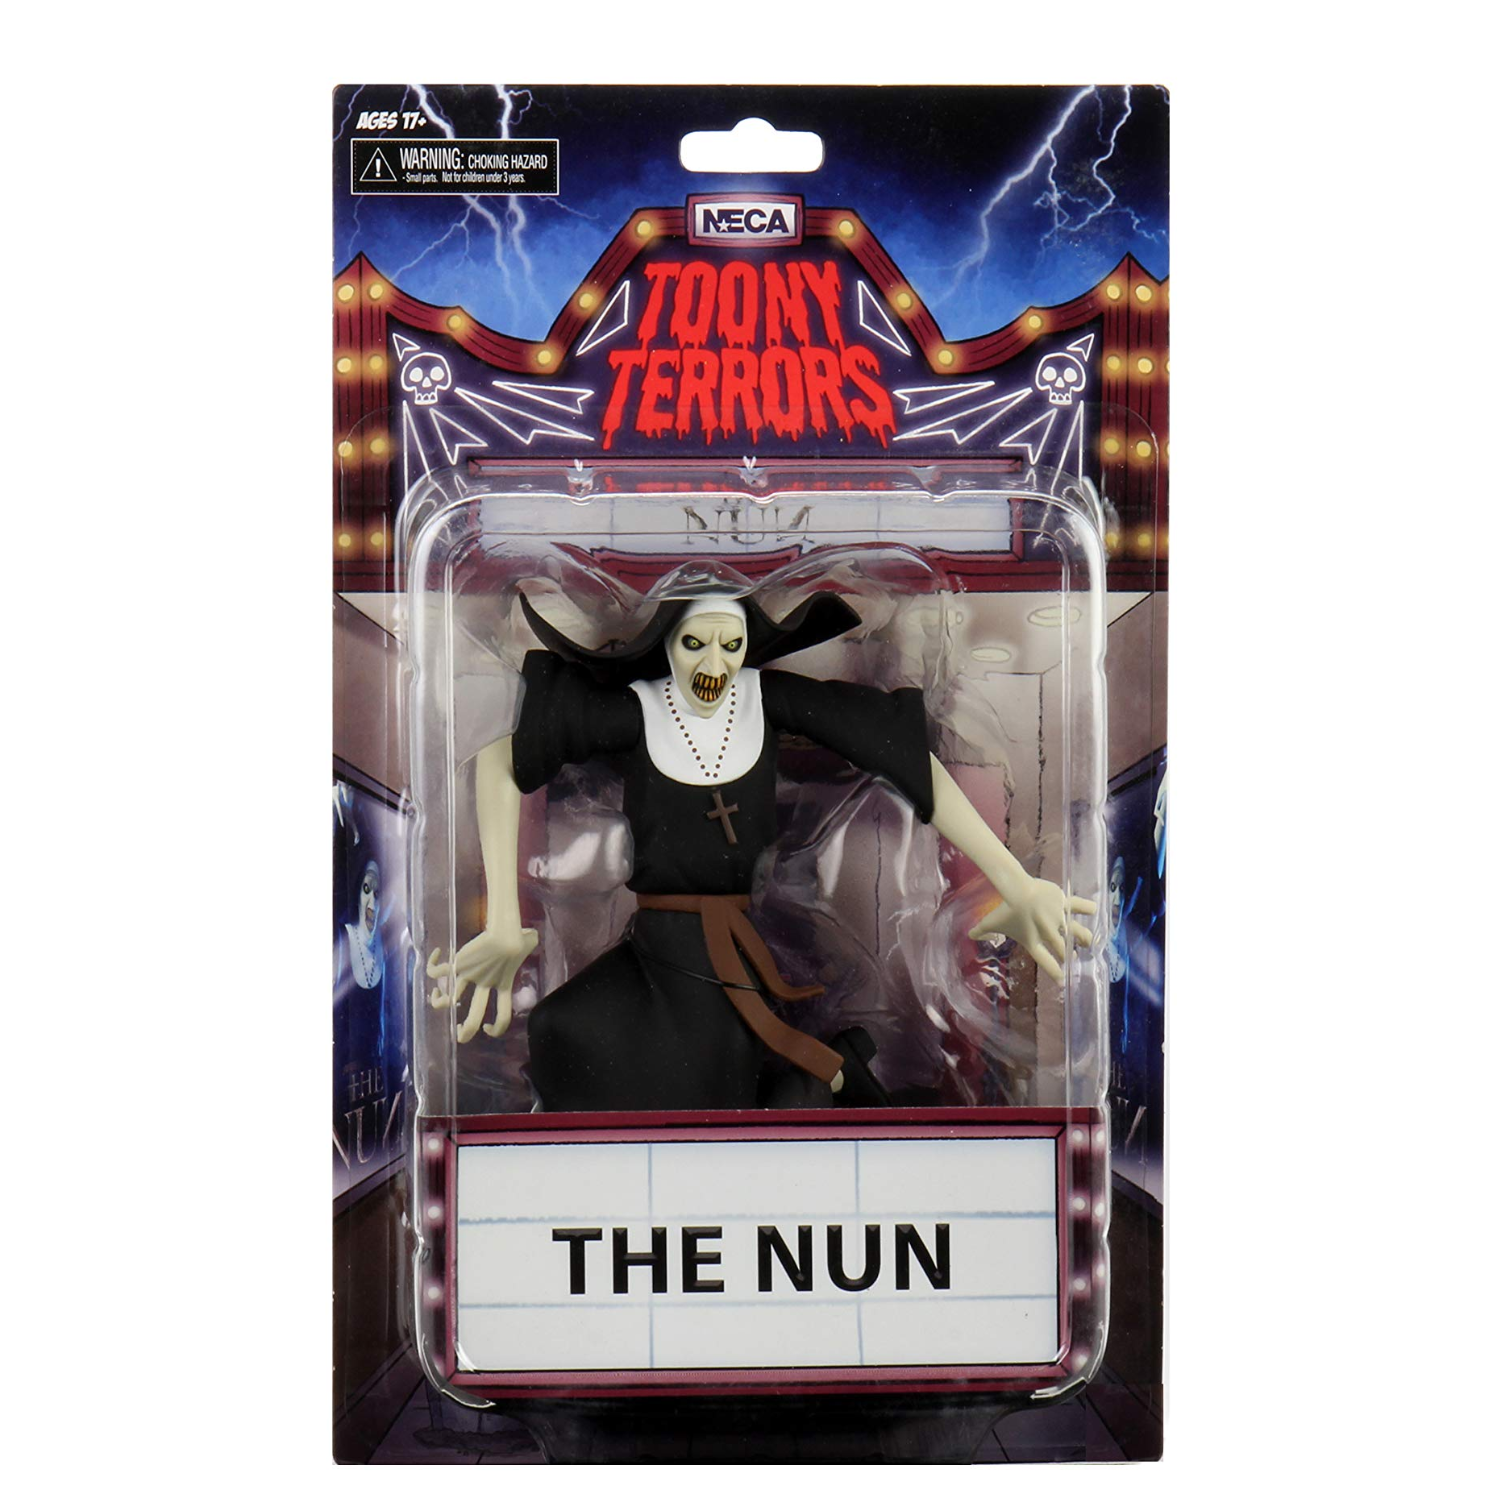 Neca Collectibles: The Conjuring Universe 6" Toony Terrors "The Nun"